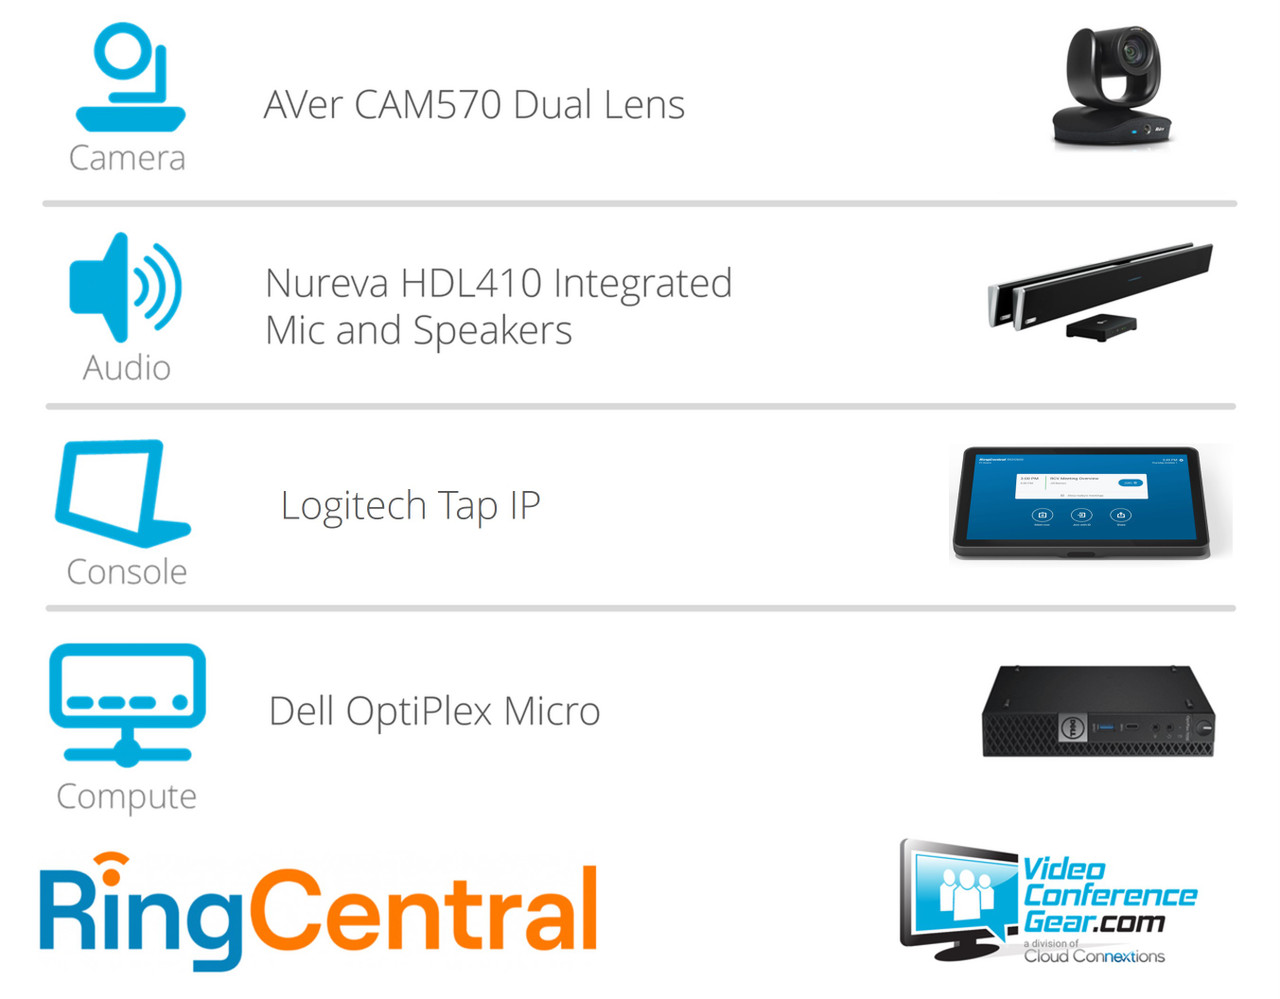 RingCentral Rooms Solution with AVer CAM570 and Nureva HDL410 - Large Room